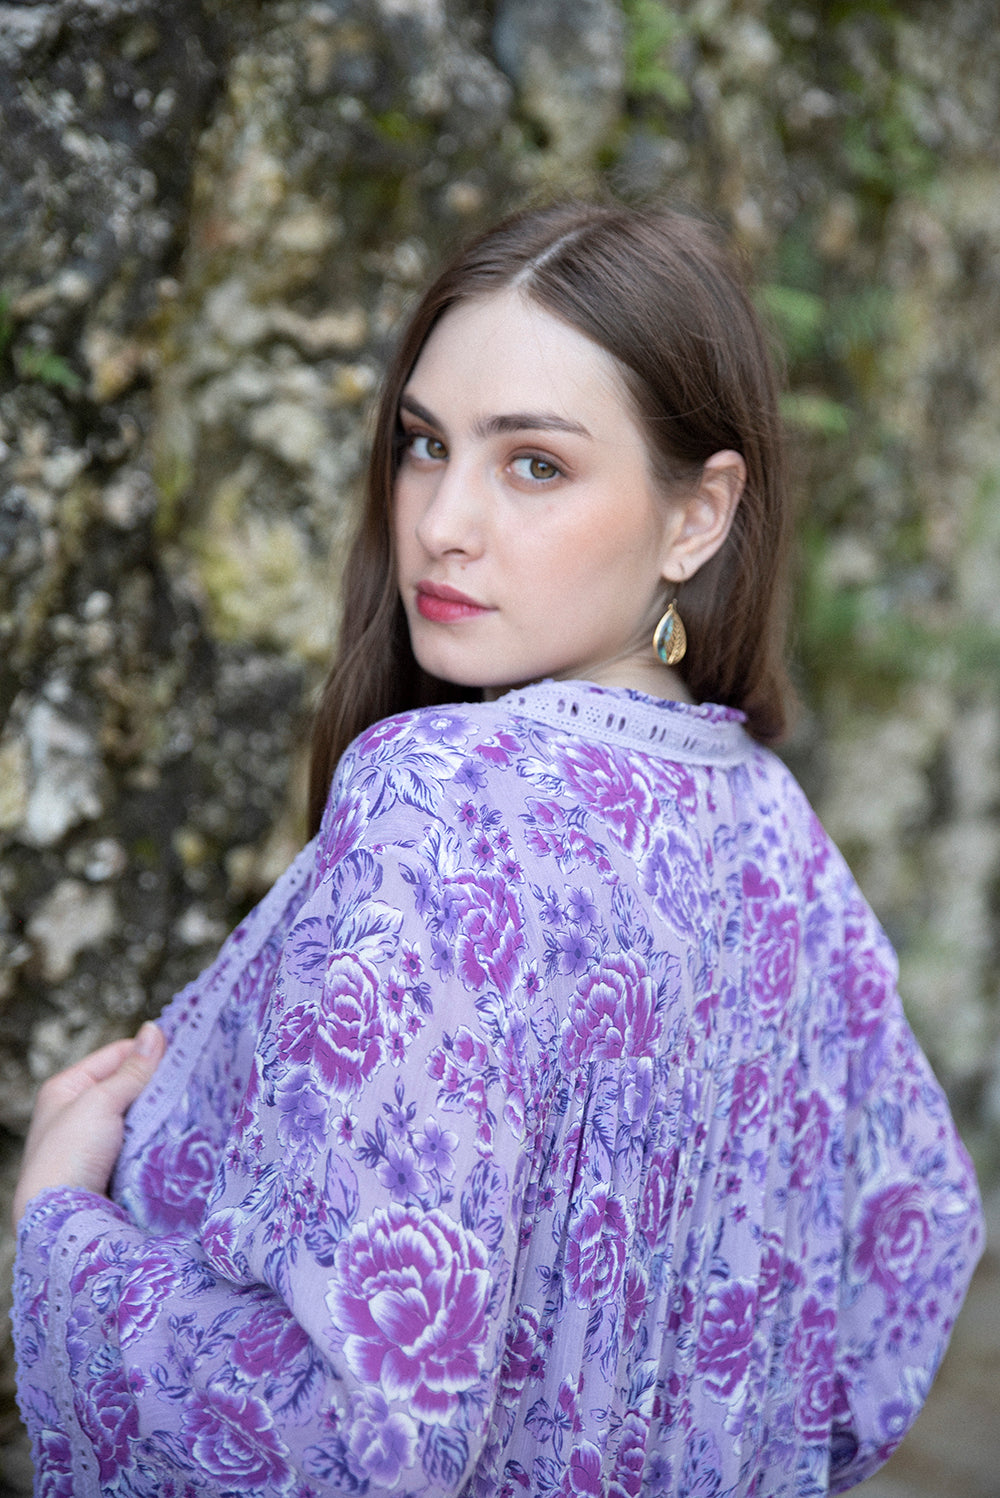 Channel bohemian vibes with the Peony Long Robe, a kimono-inspired treasure from Tulle and Batiste's Peony collection, crafted ethically by Balinese artisans